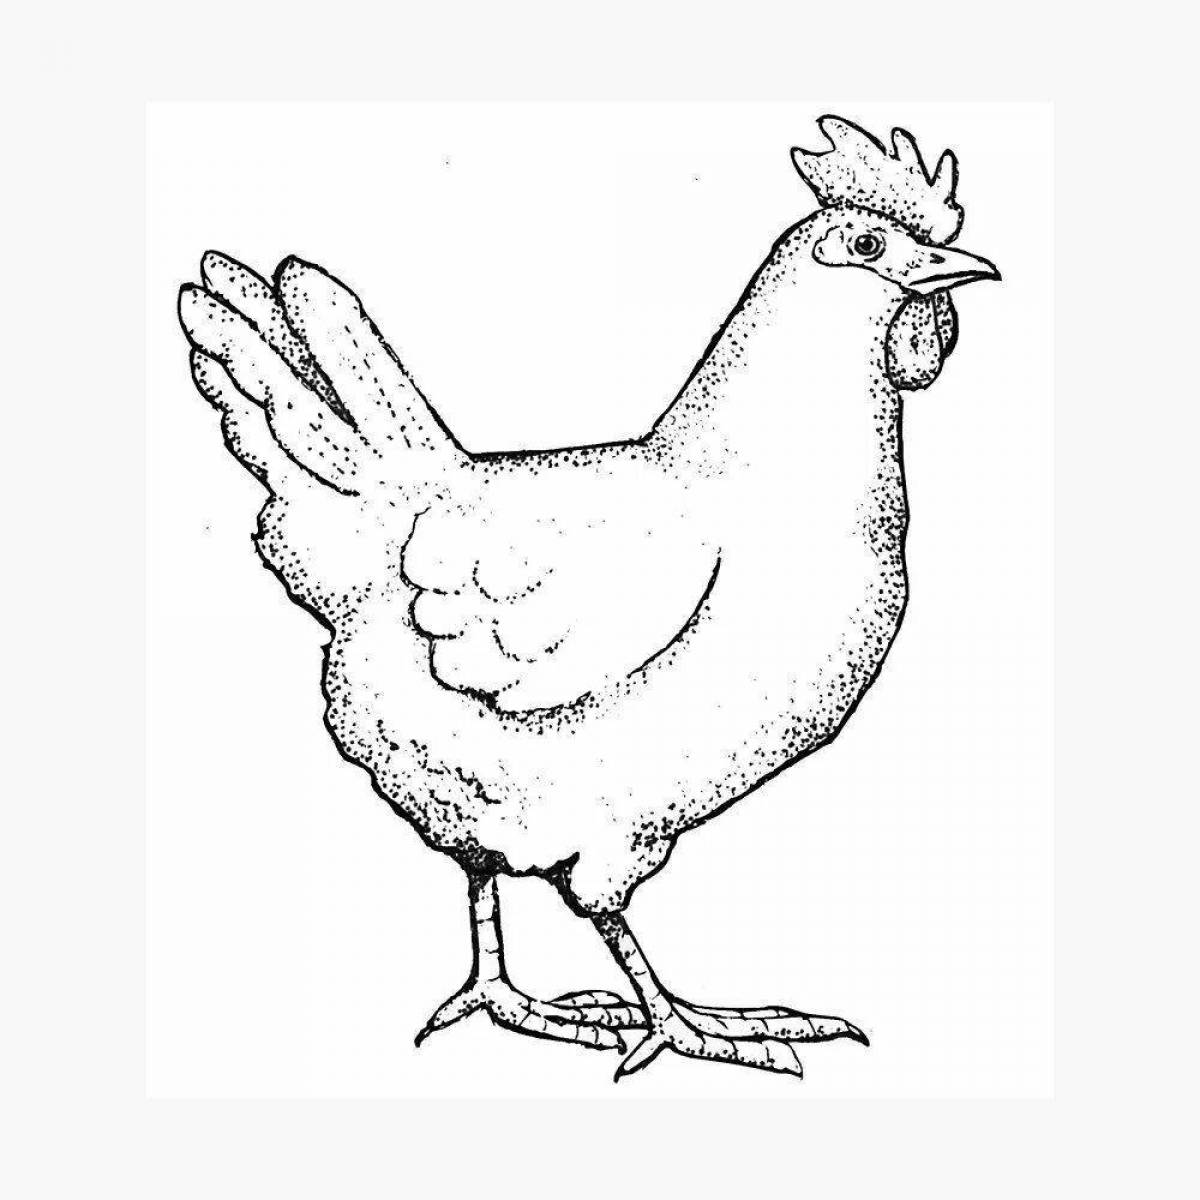 Shiny black chicken coloring page